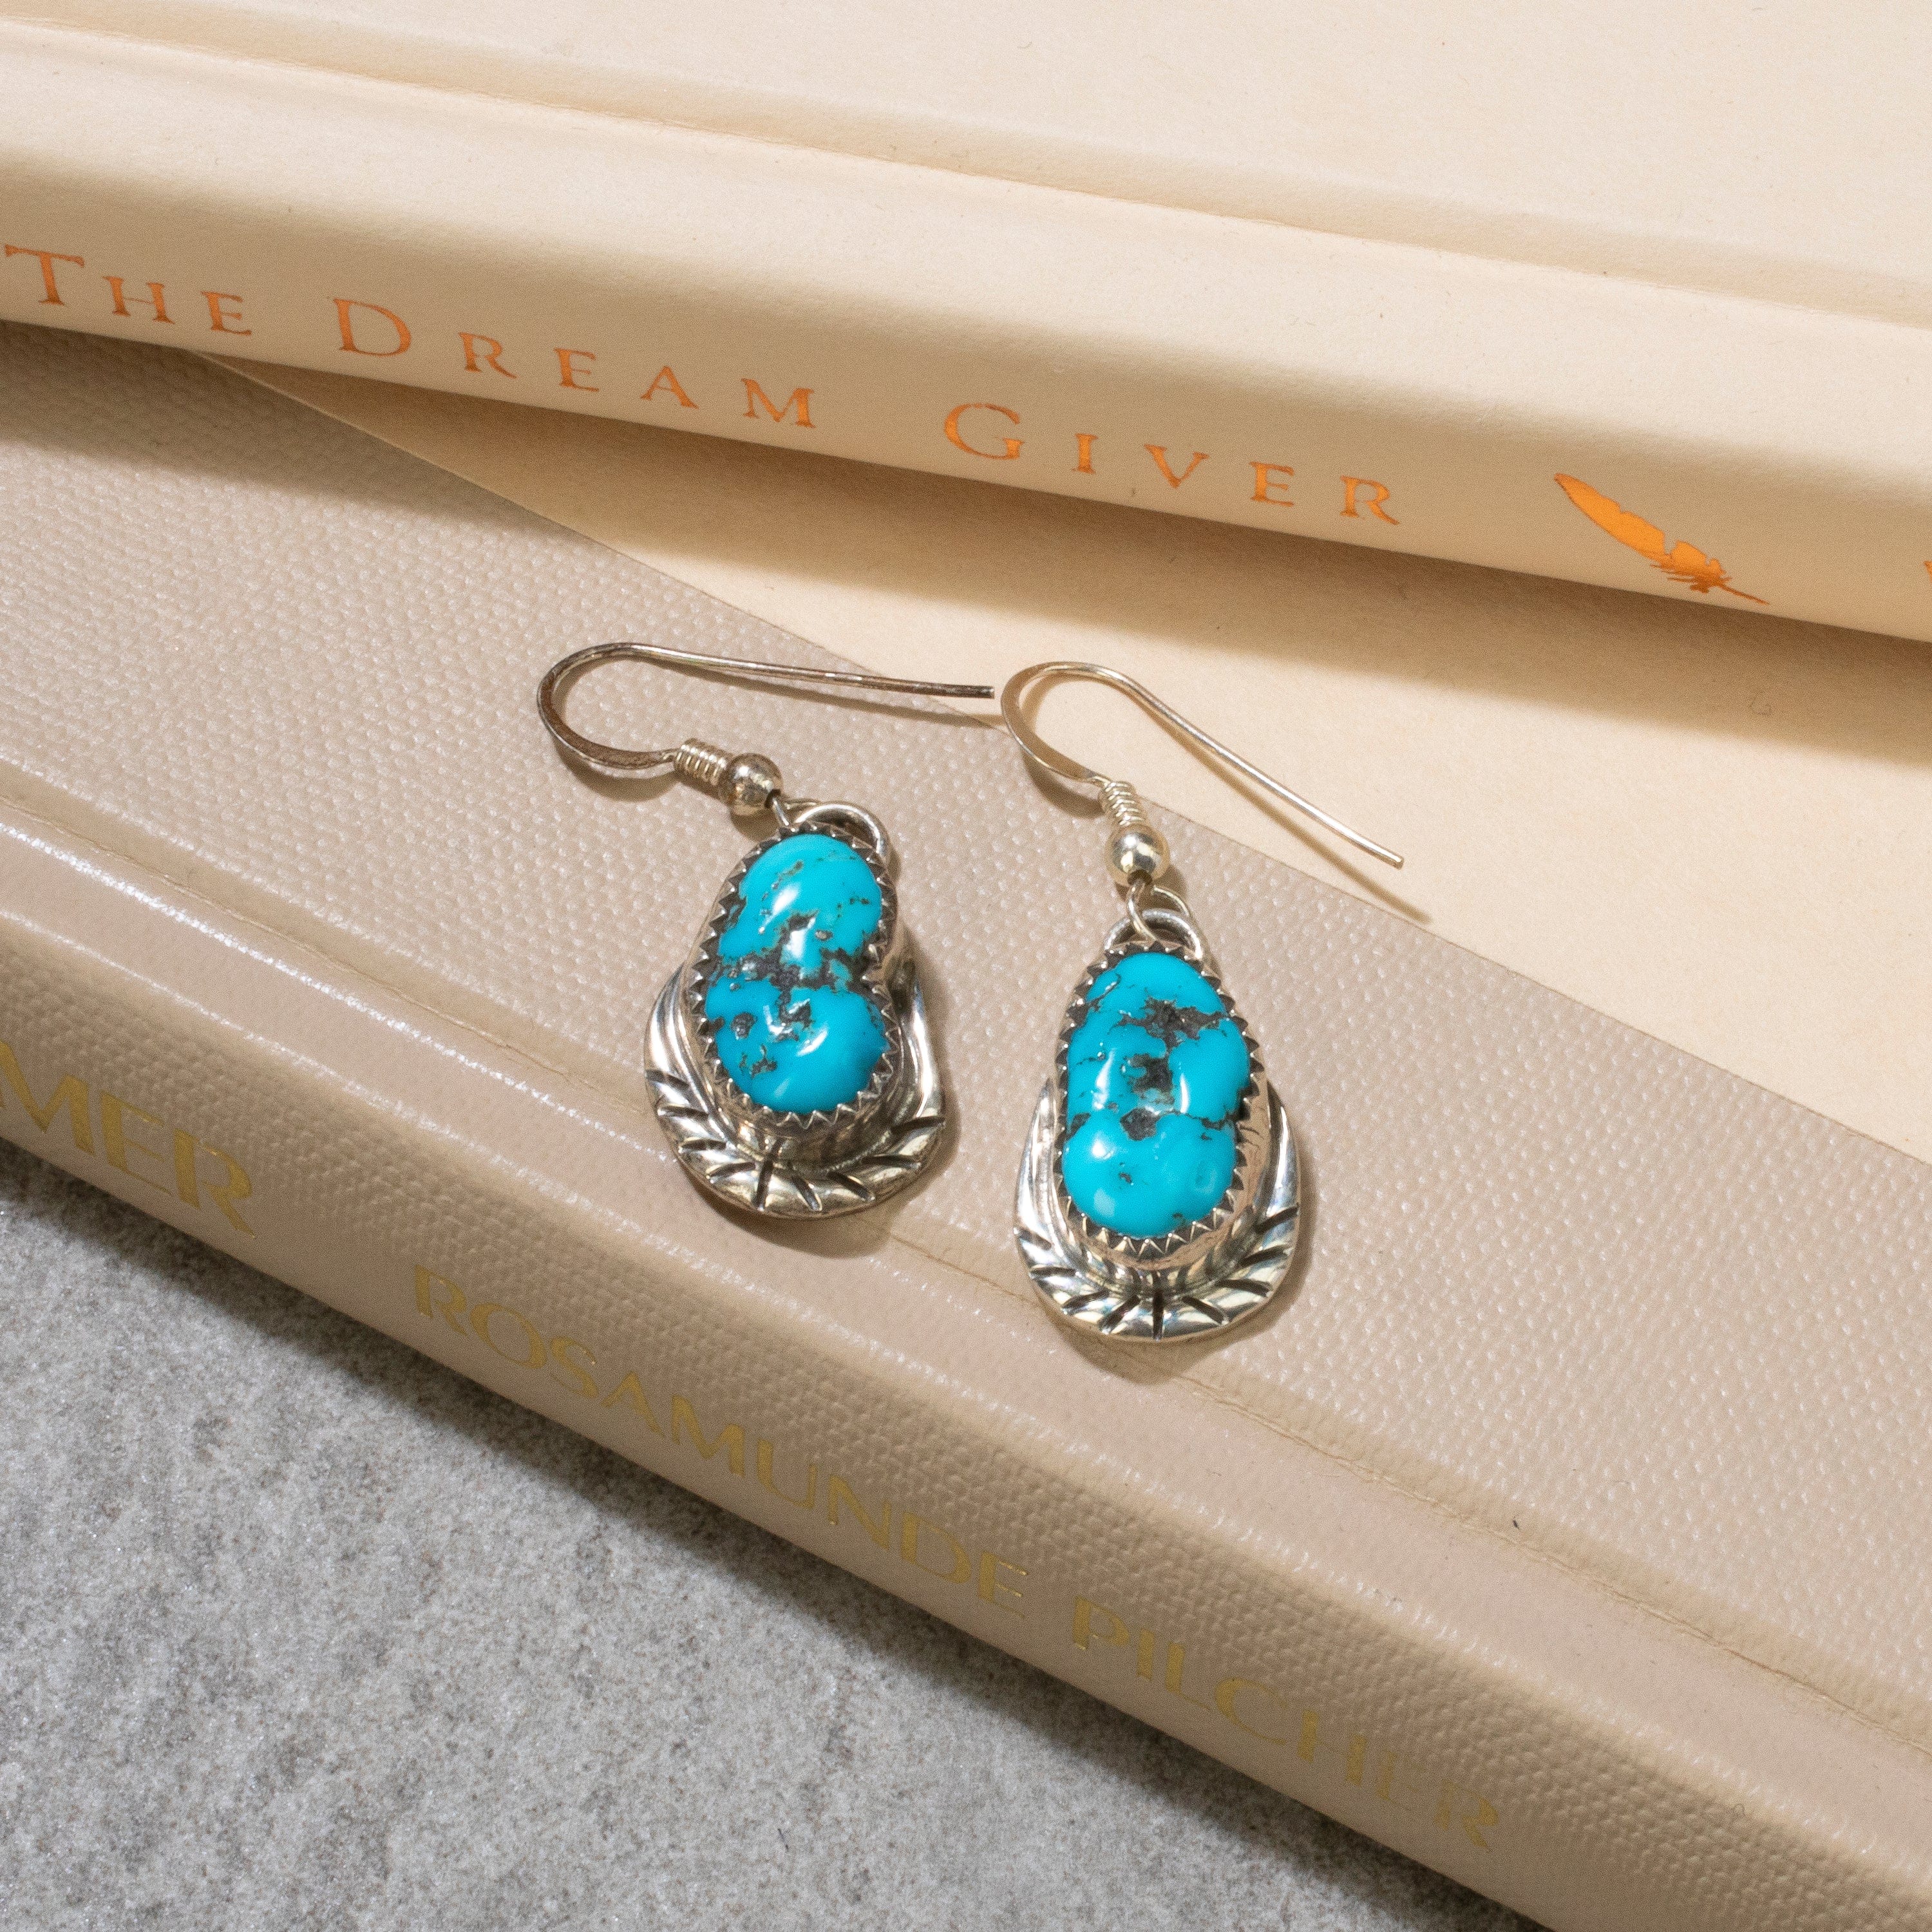 Kalifano Native American Jewelry Sleeping Beauty Turquoise Dangle Navajo USA Native American Made 925 Sterling Silver Earrings with French Hook NAE400.040